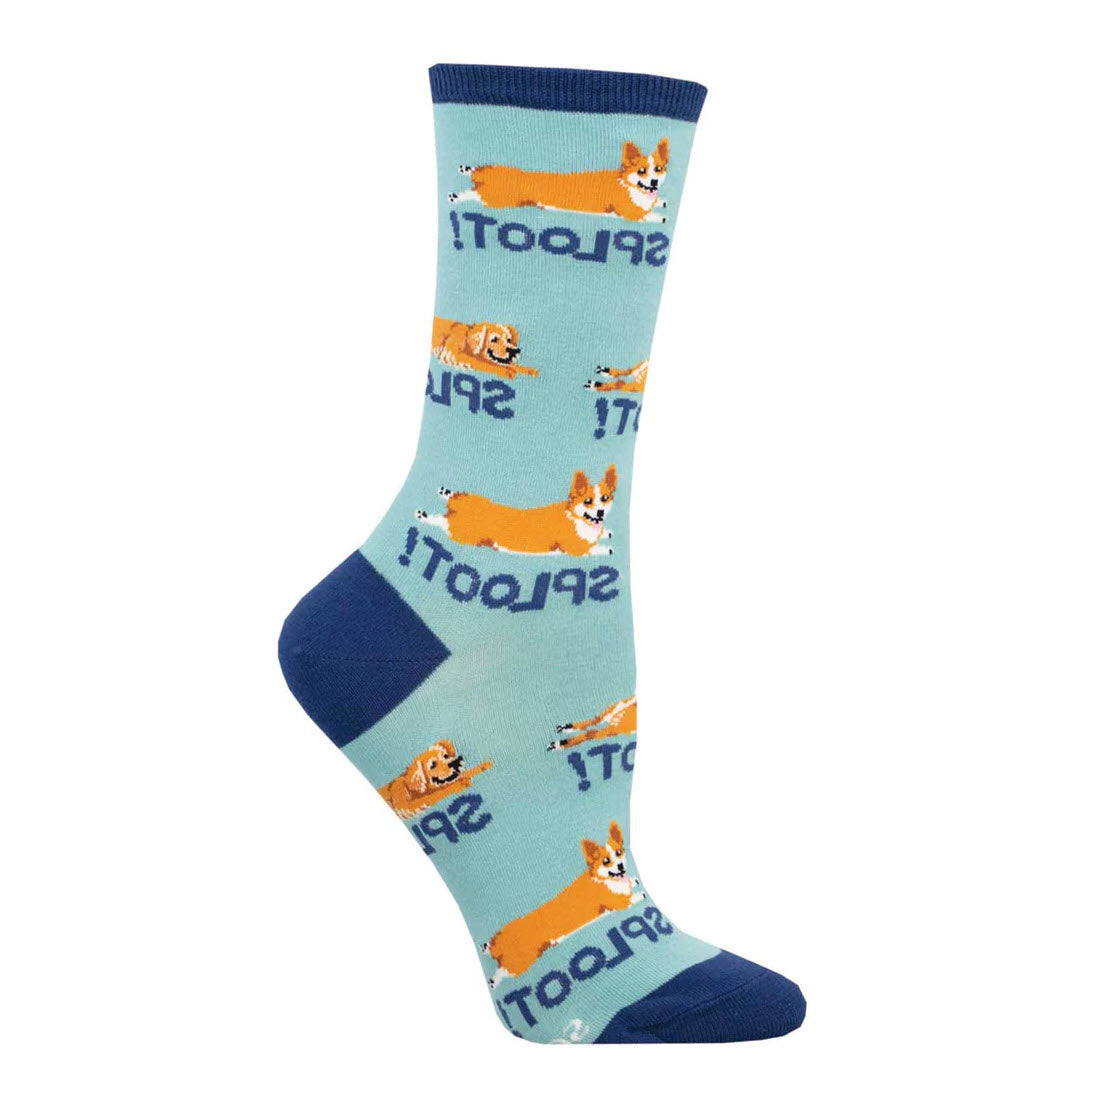 A *(brand name)* sock featuring a pattern of playful orange and white corgis splooting, with the word "sploot" in various orientations.